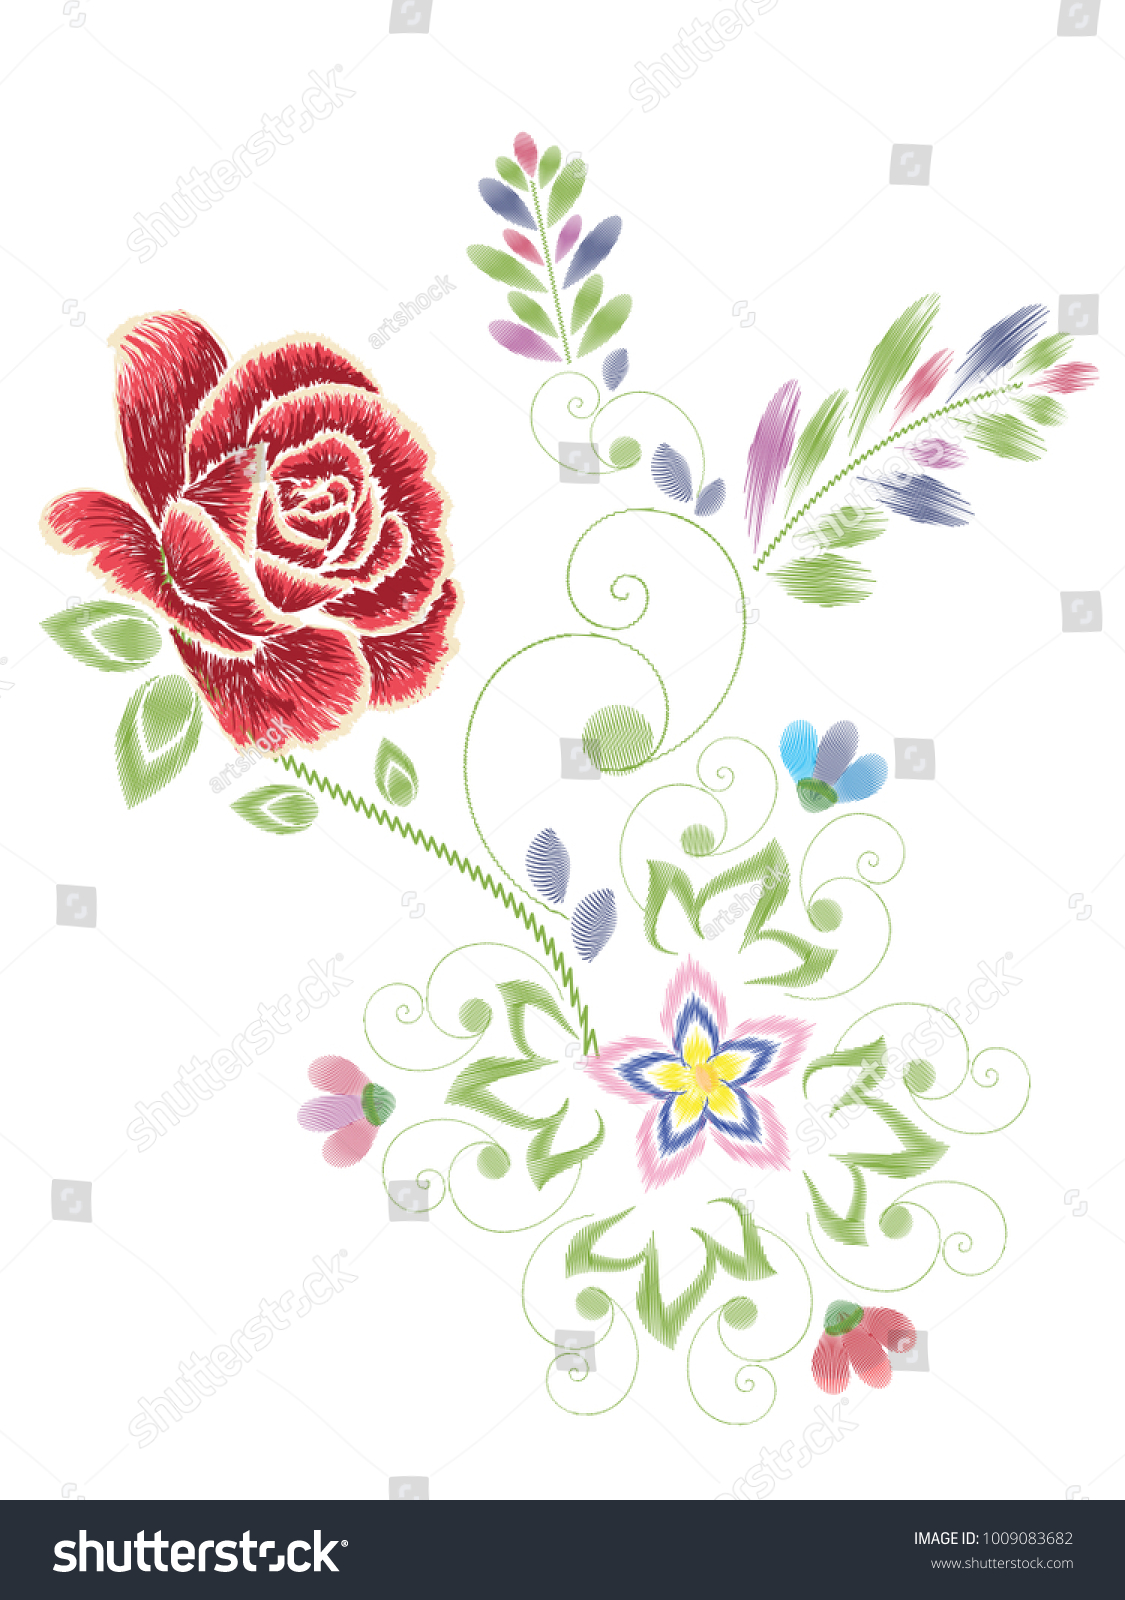 Decorative Embroidery Design Roses Floral Ornament Stock Vector ...